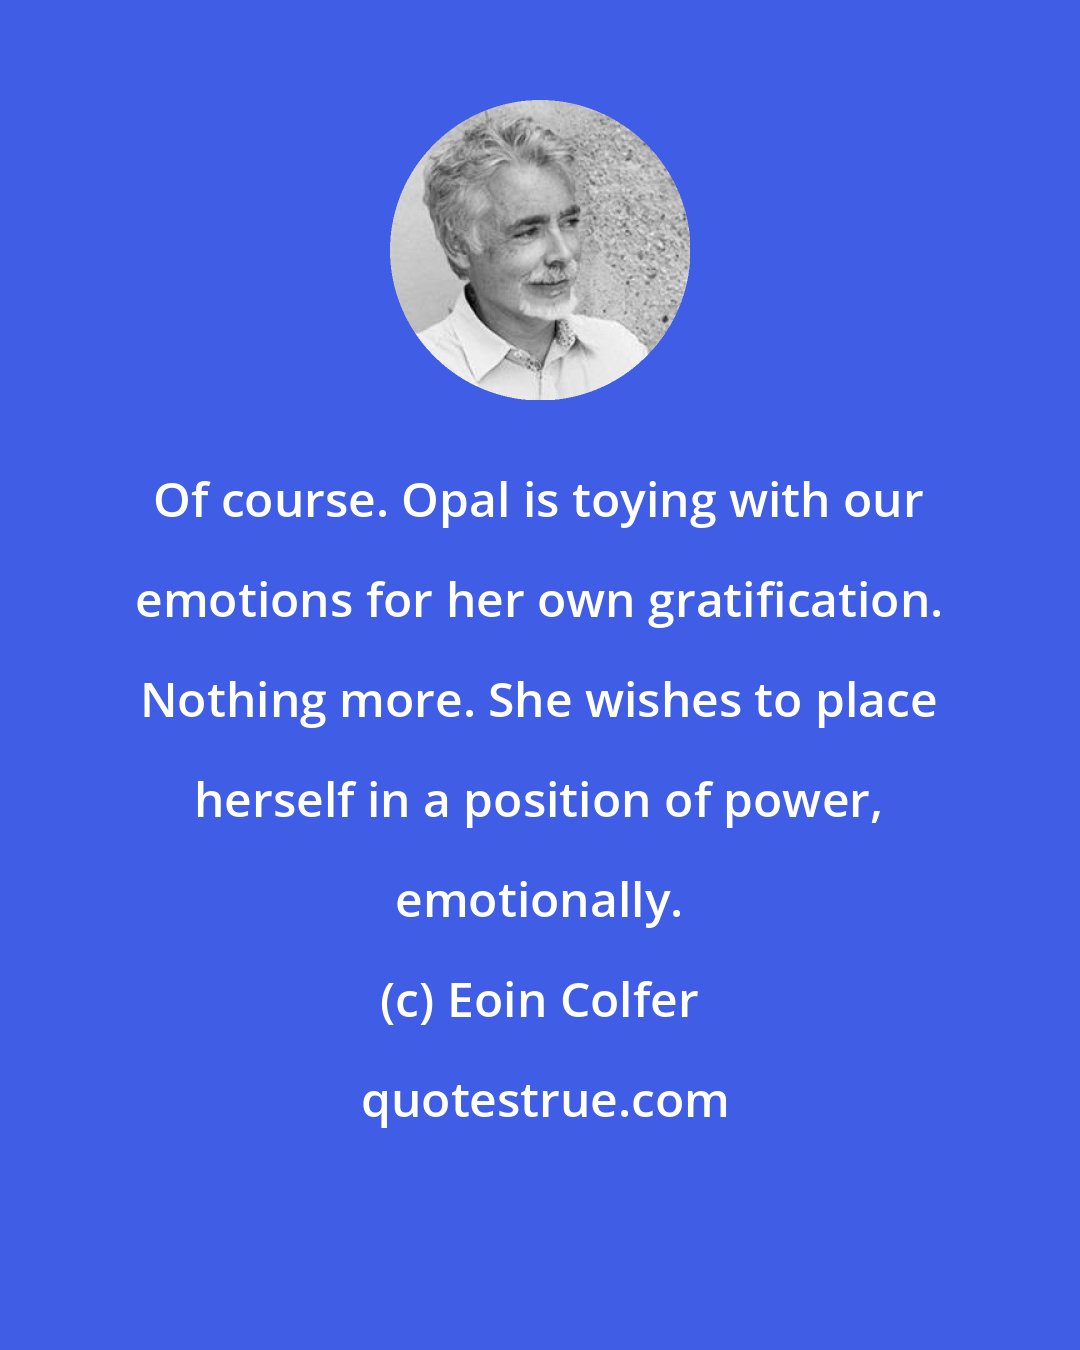 Eoin Colfer: Of course. Opal is toying with our emotions for her own gratification. Nothing more. She wishes to place herself in a position of power, emotionally.